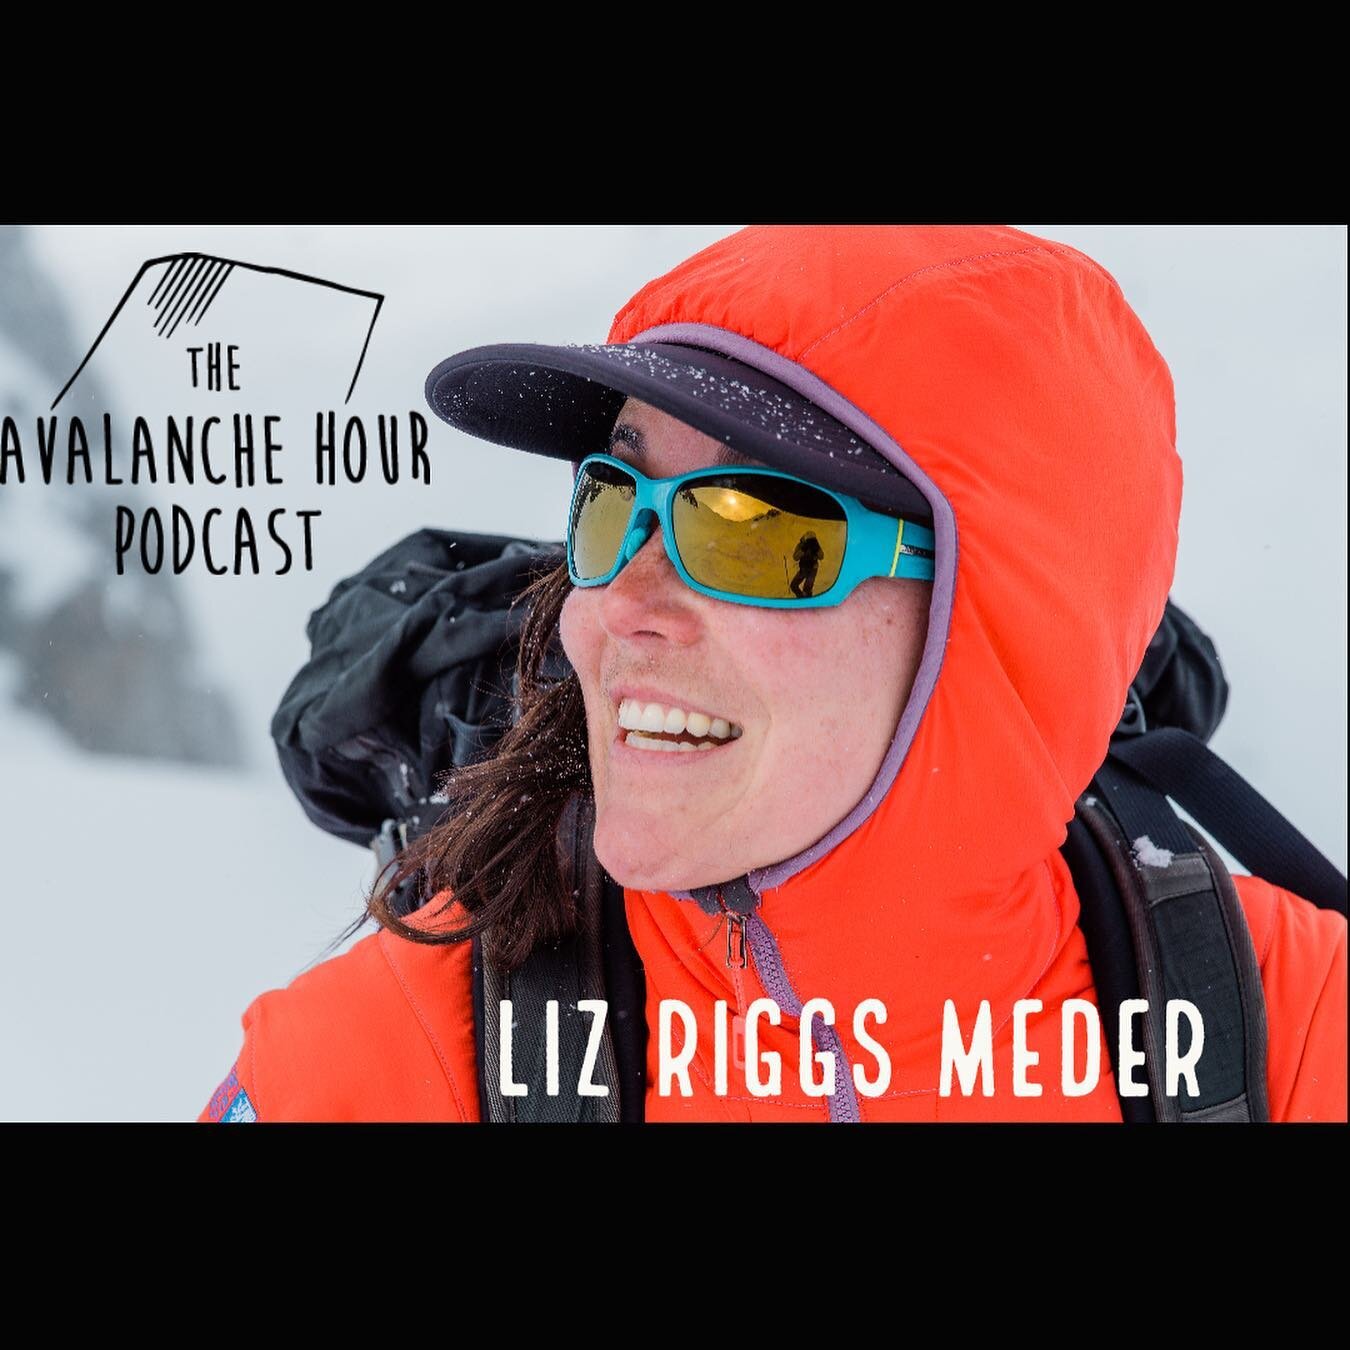 &lsquo;Sode 6.12 is 🆙 @kraemcneil interviews Liz Riggs Meder who is the recreation program director for @aiare_official.  Liz shares with us some thoughts and advice around risk management instruction, the role of public health in avalanche educatio